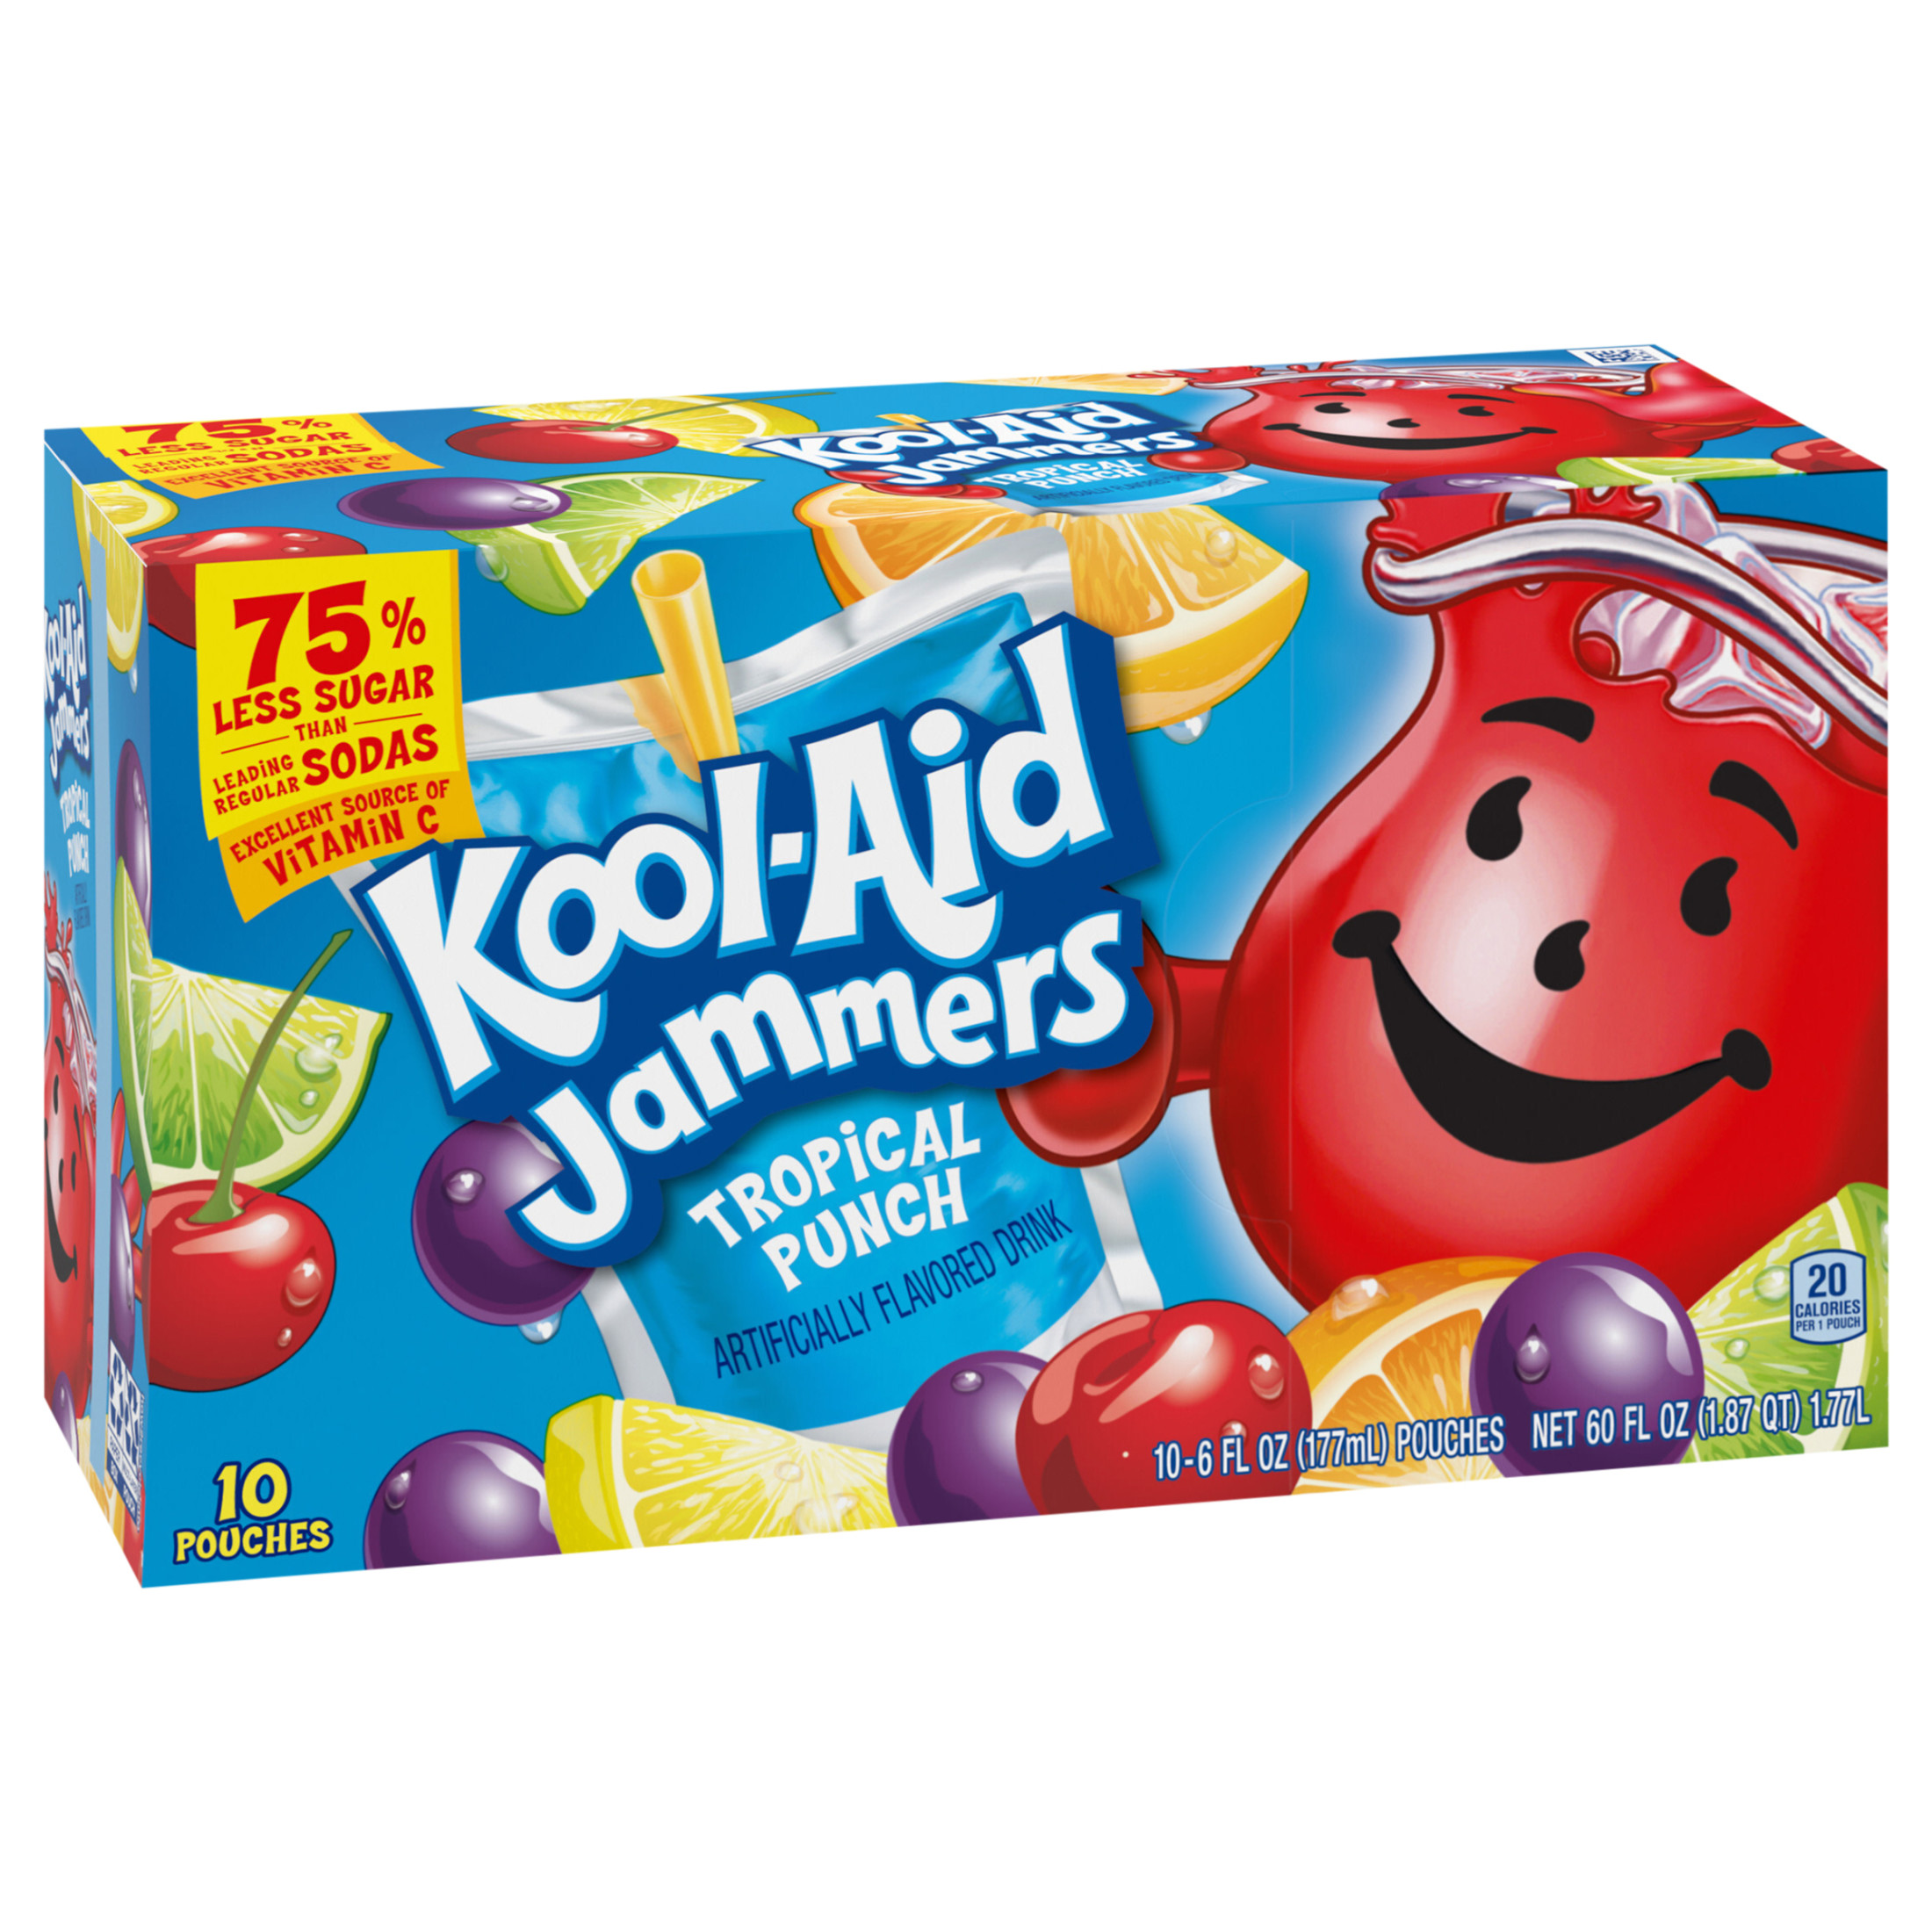 Kool Aid Jammers Tropical Punch Kids Drink 0% Juice Box Pouches, 10 Ct Box, 6 fl oz Pouches - image 4 of 7